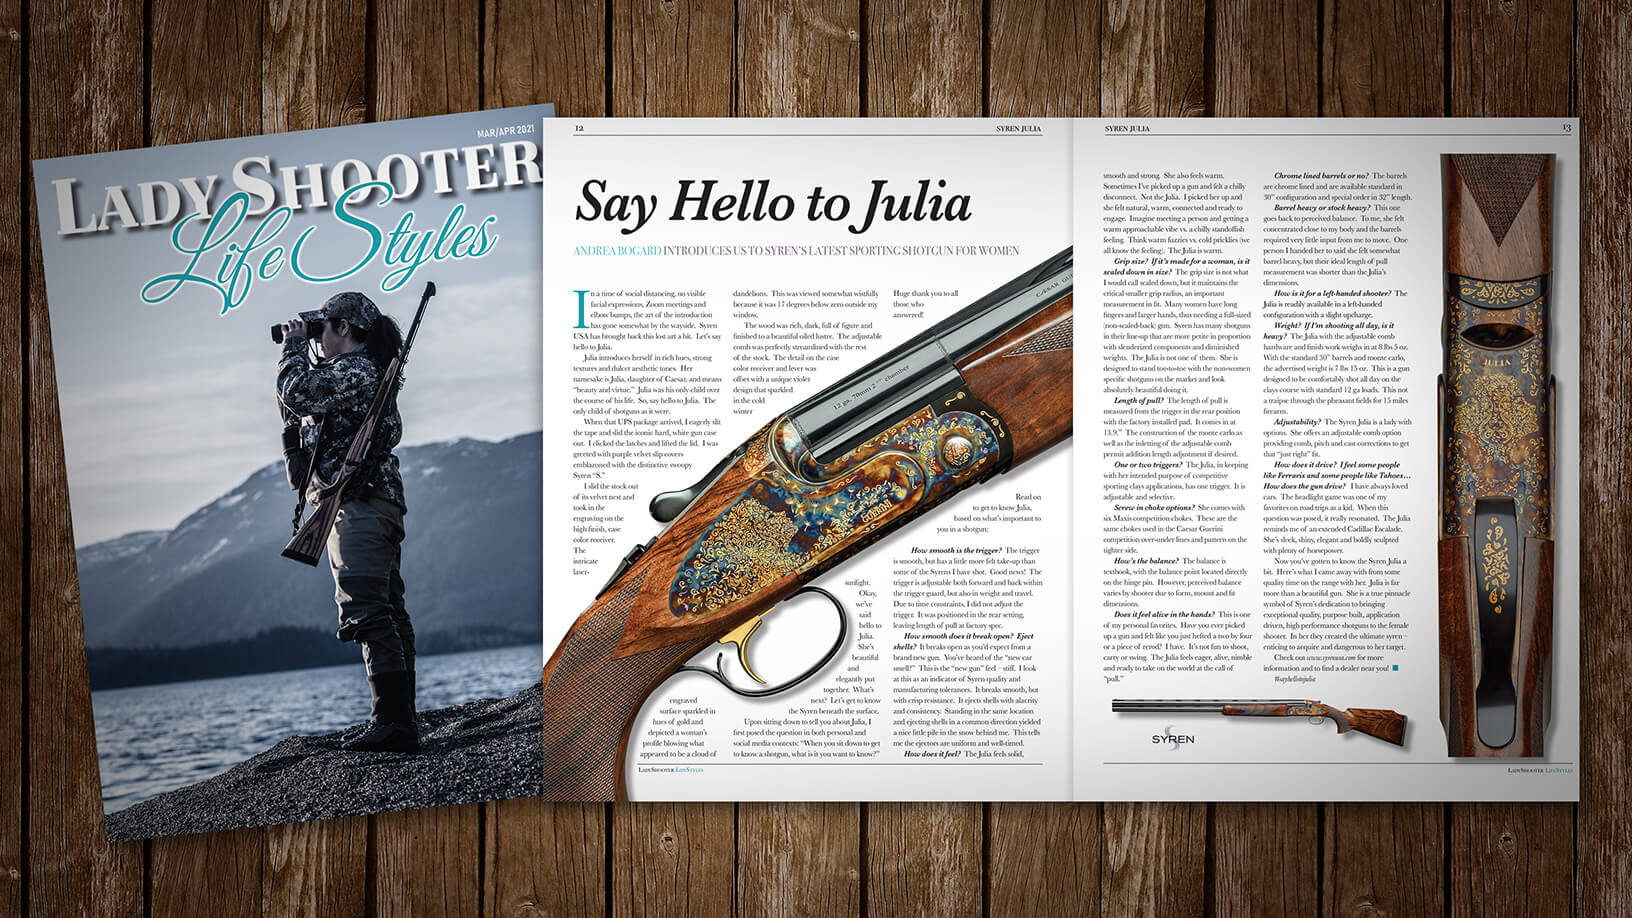 [LadyShooter Lifestyles: 04:21] Say Hello To Julia by Andrea Bogard